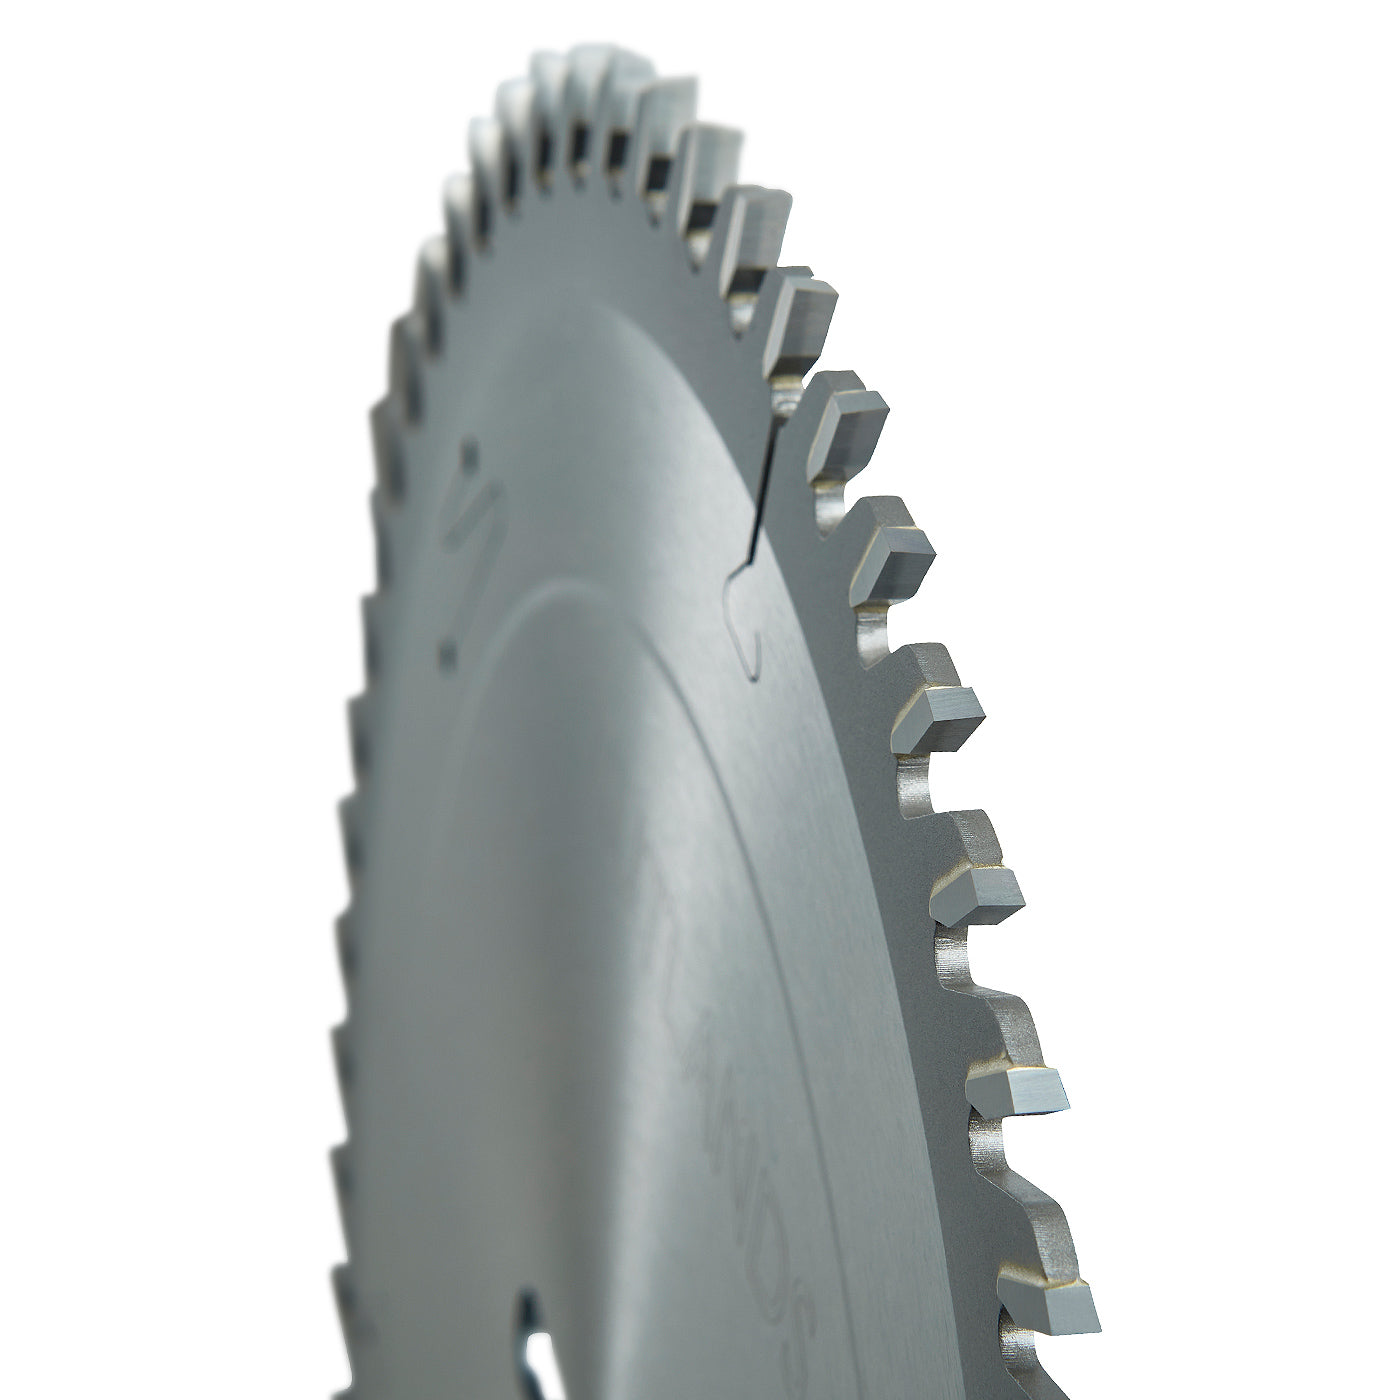 Table Saw Blade - Fine Finish - 250mm x 60T x 30mm 